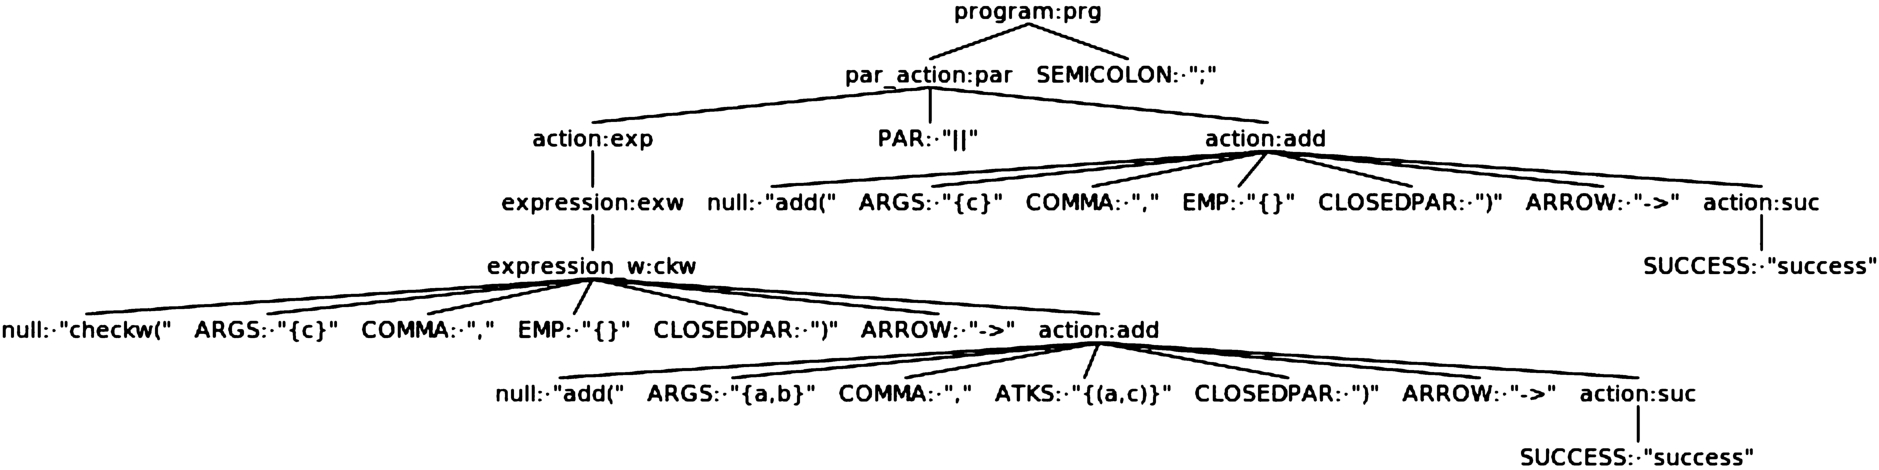 Parse tree of the cla program in Example 5.